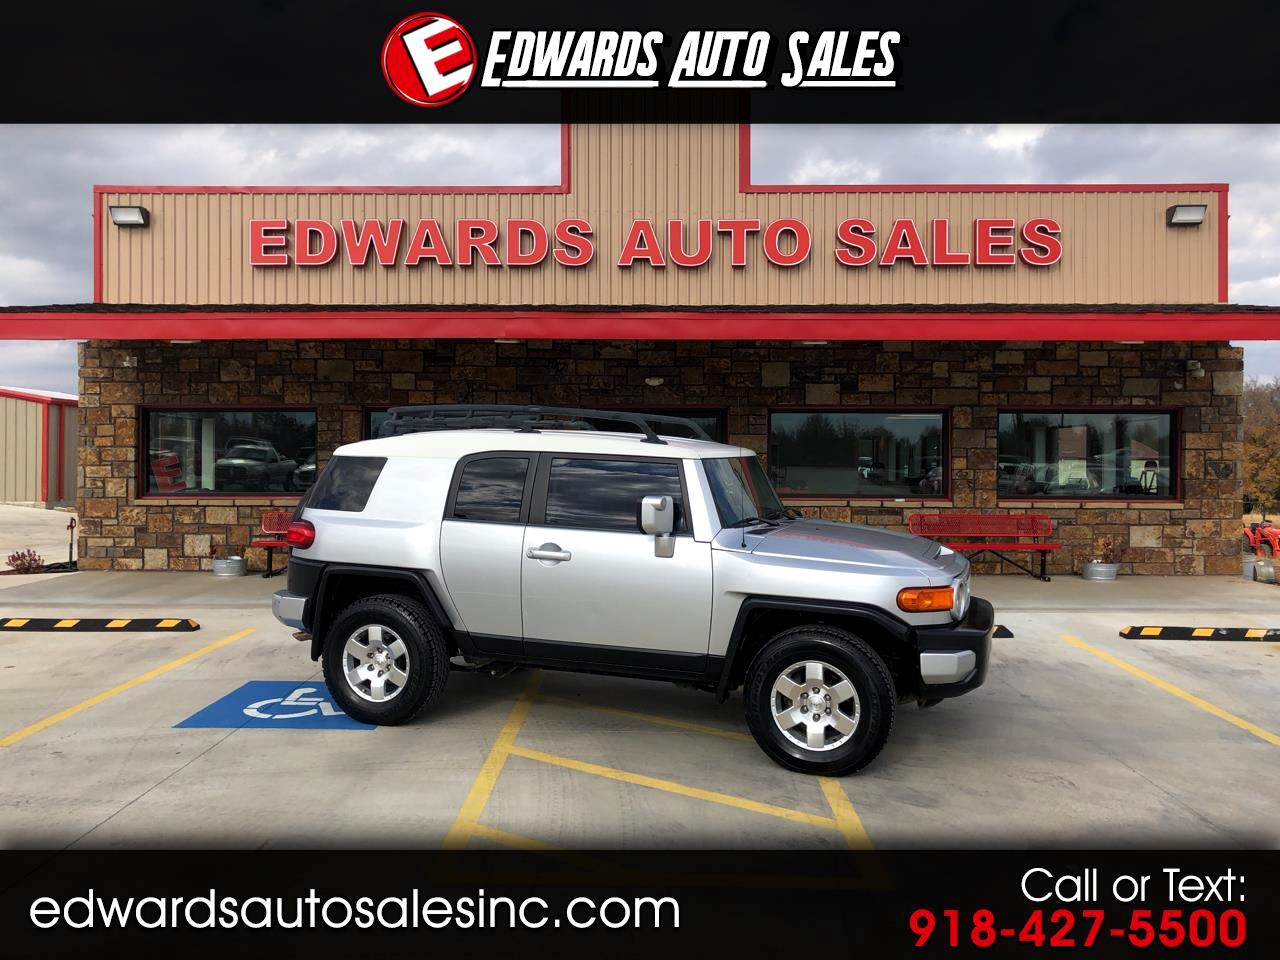 Used 2007 Toyota Fj Cruiser 4wd 4dr Manual Natl For Sale In